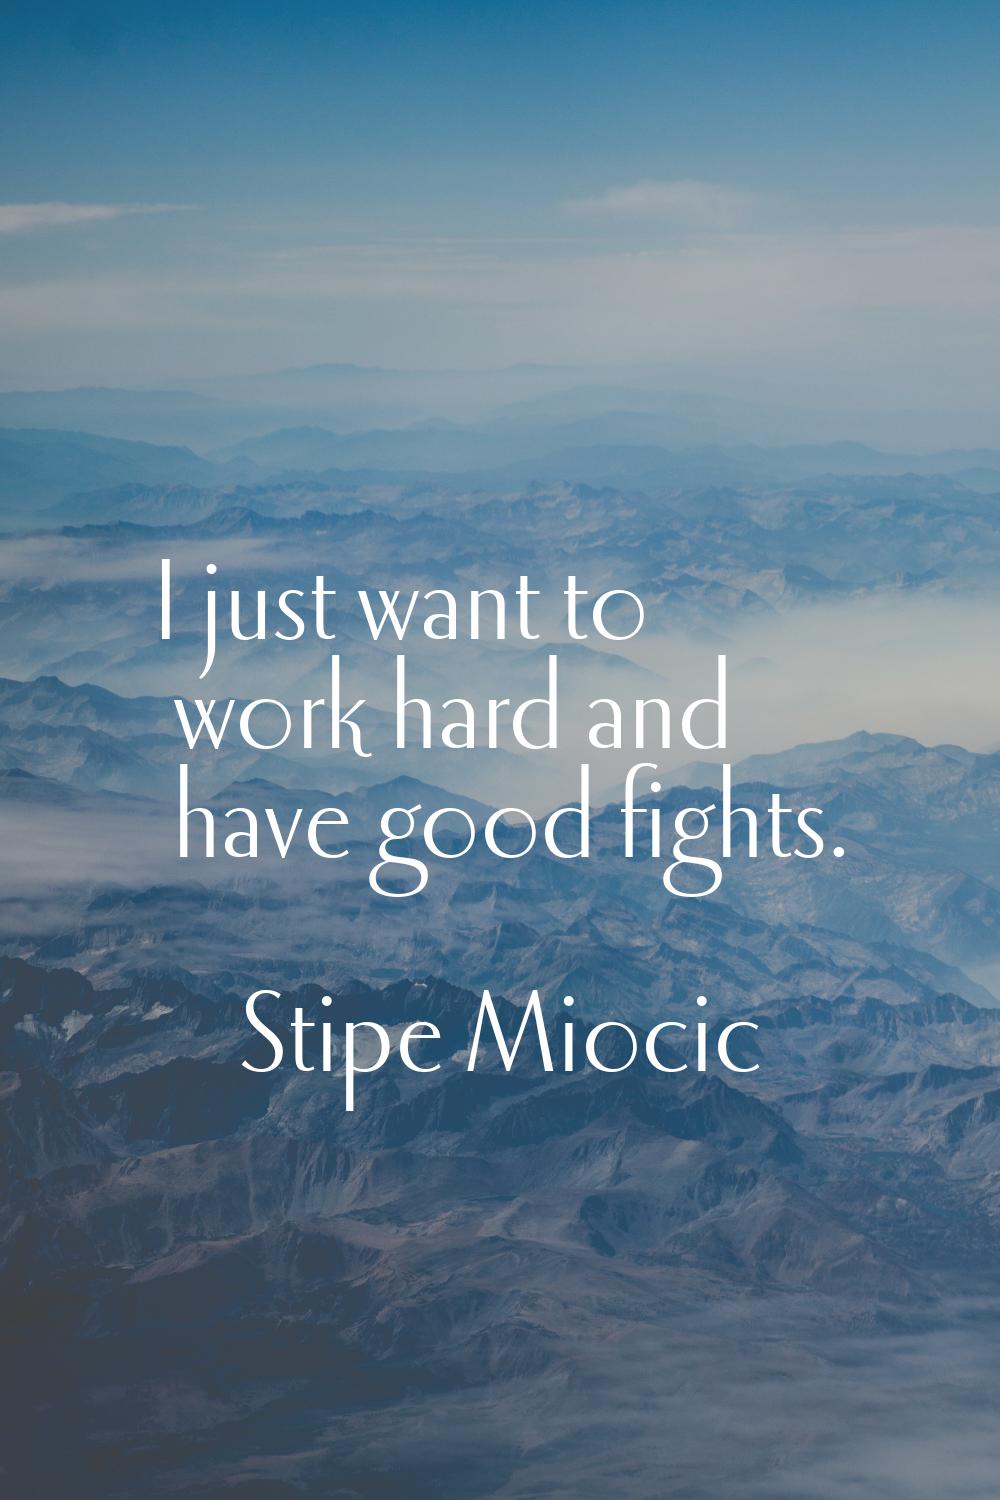 I just want to work hard and have good fights.